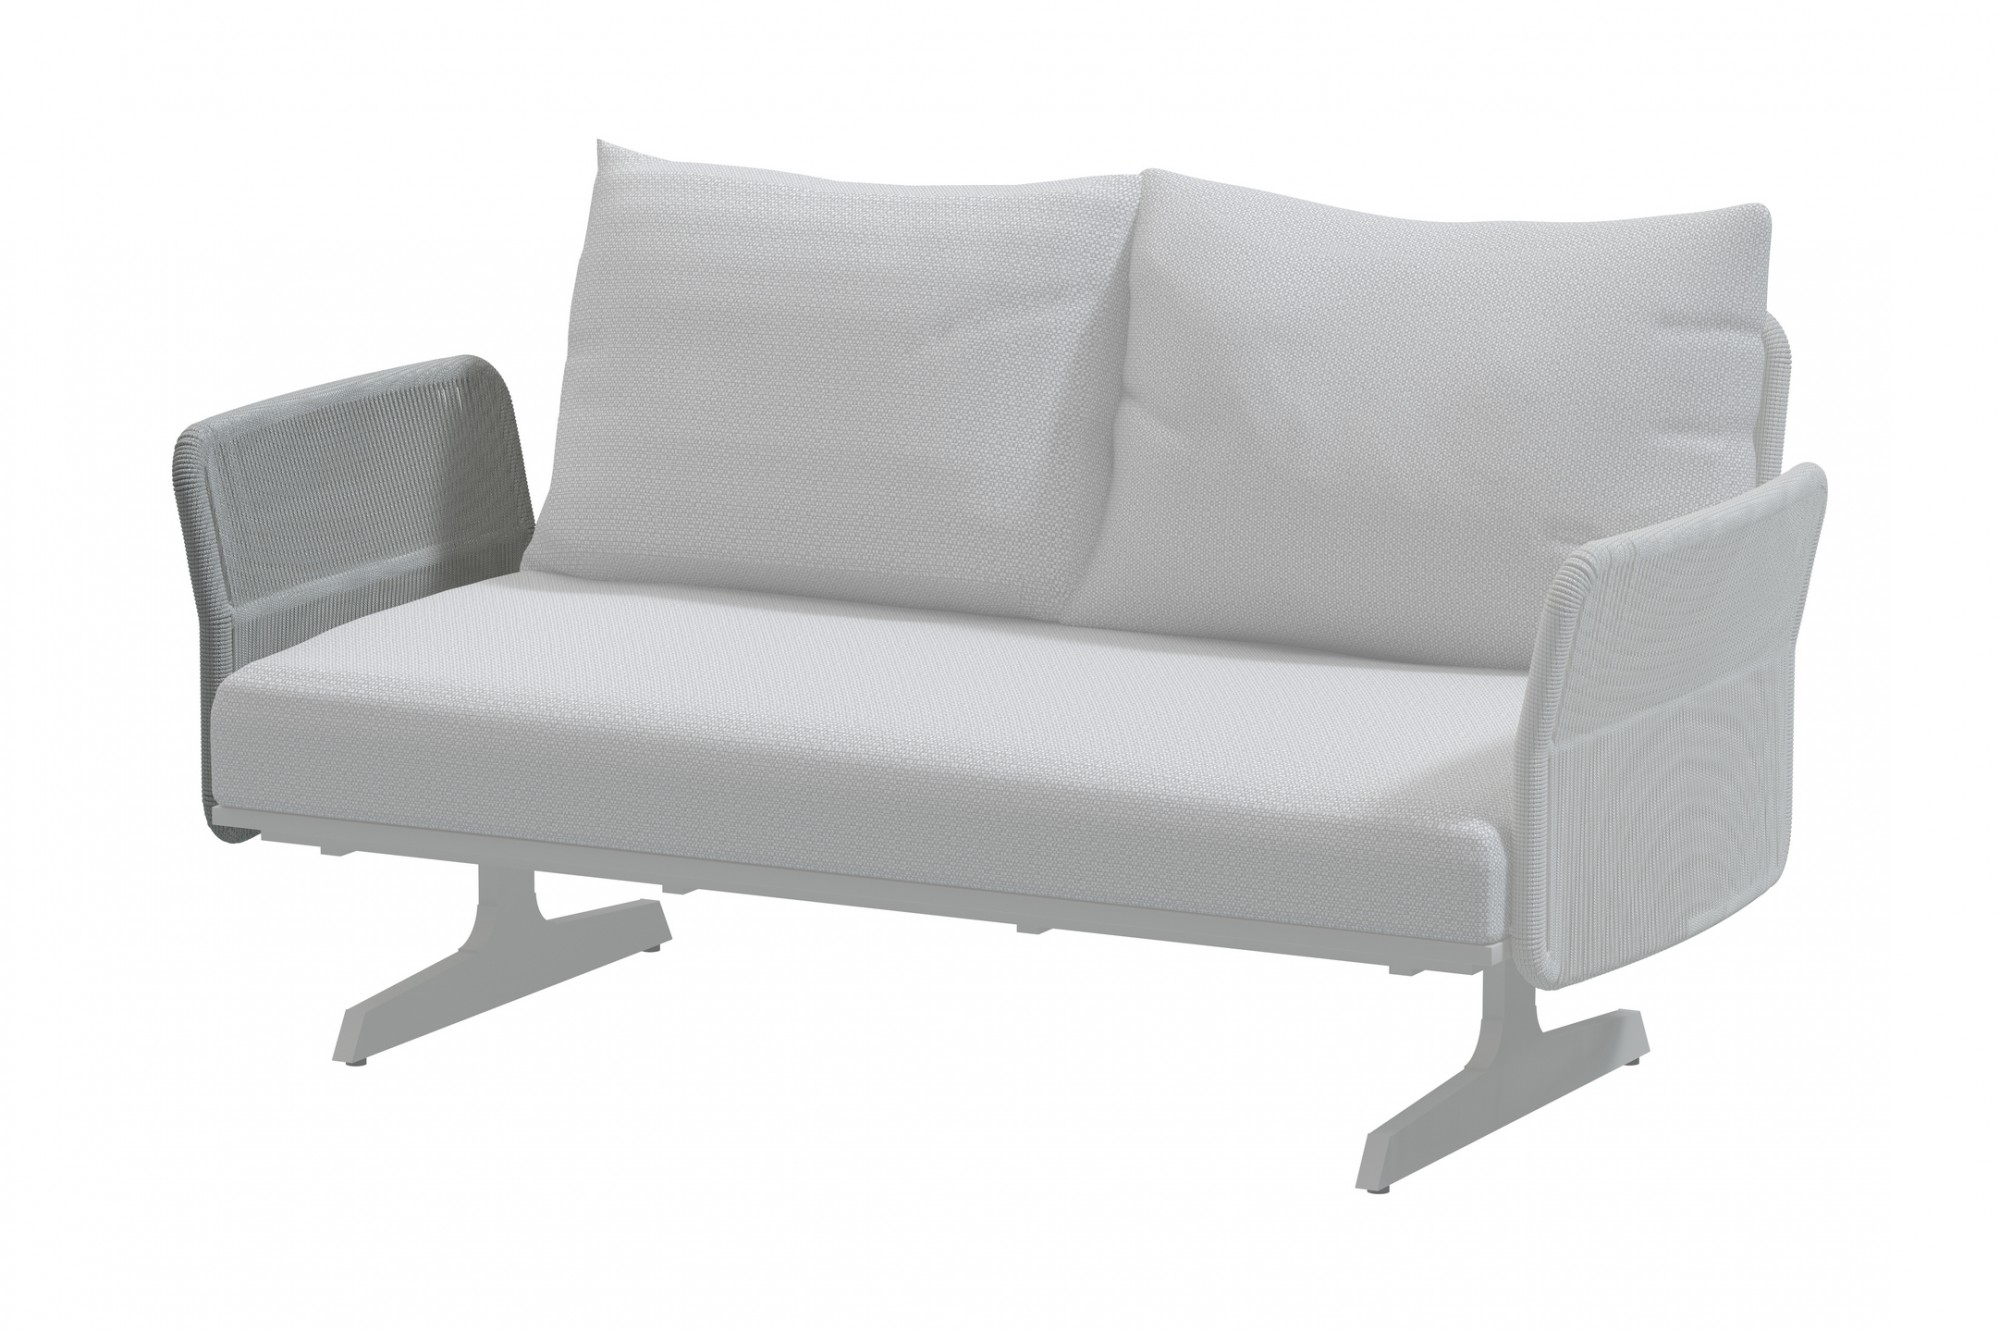 4 Seasons Outdoor Play Chaise Longue 